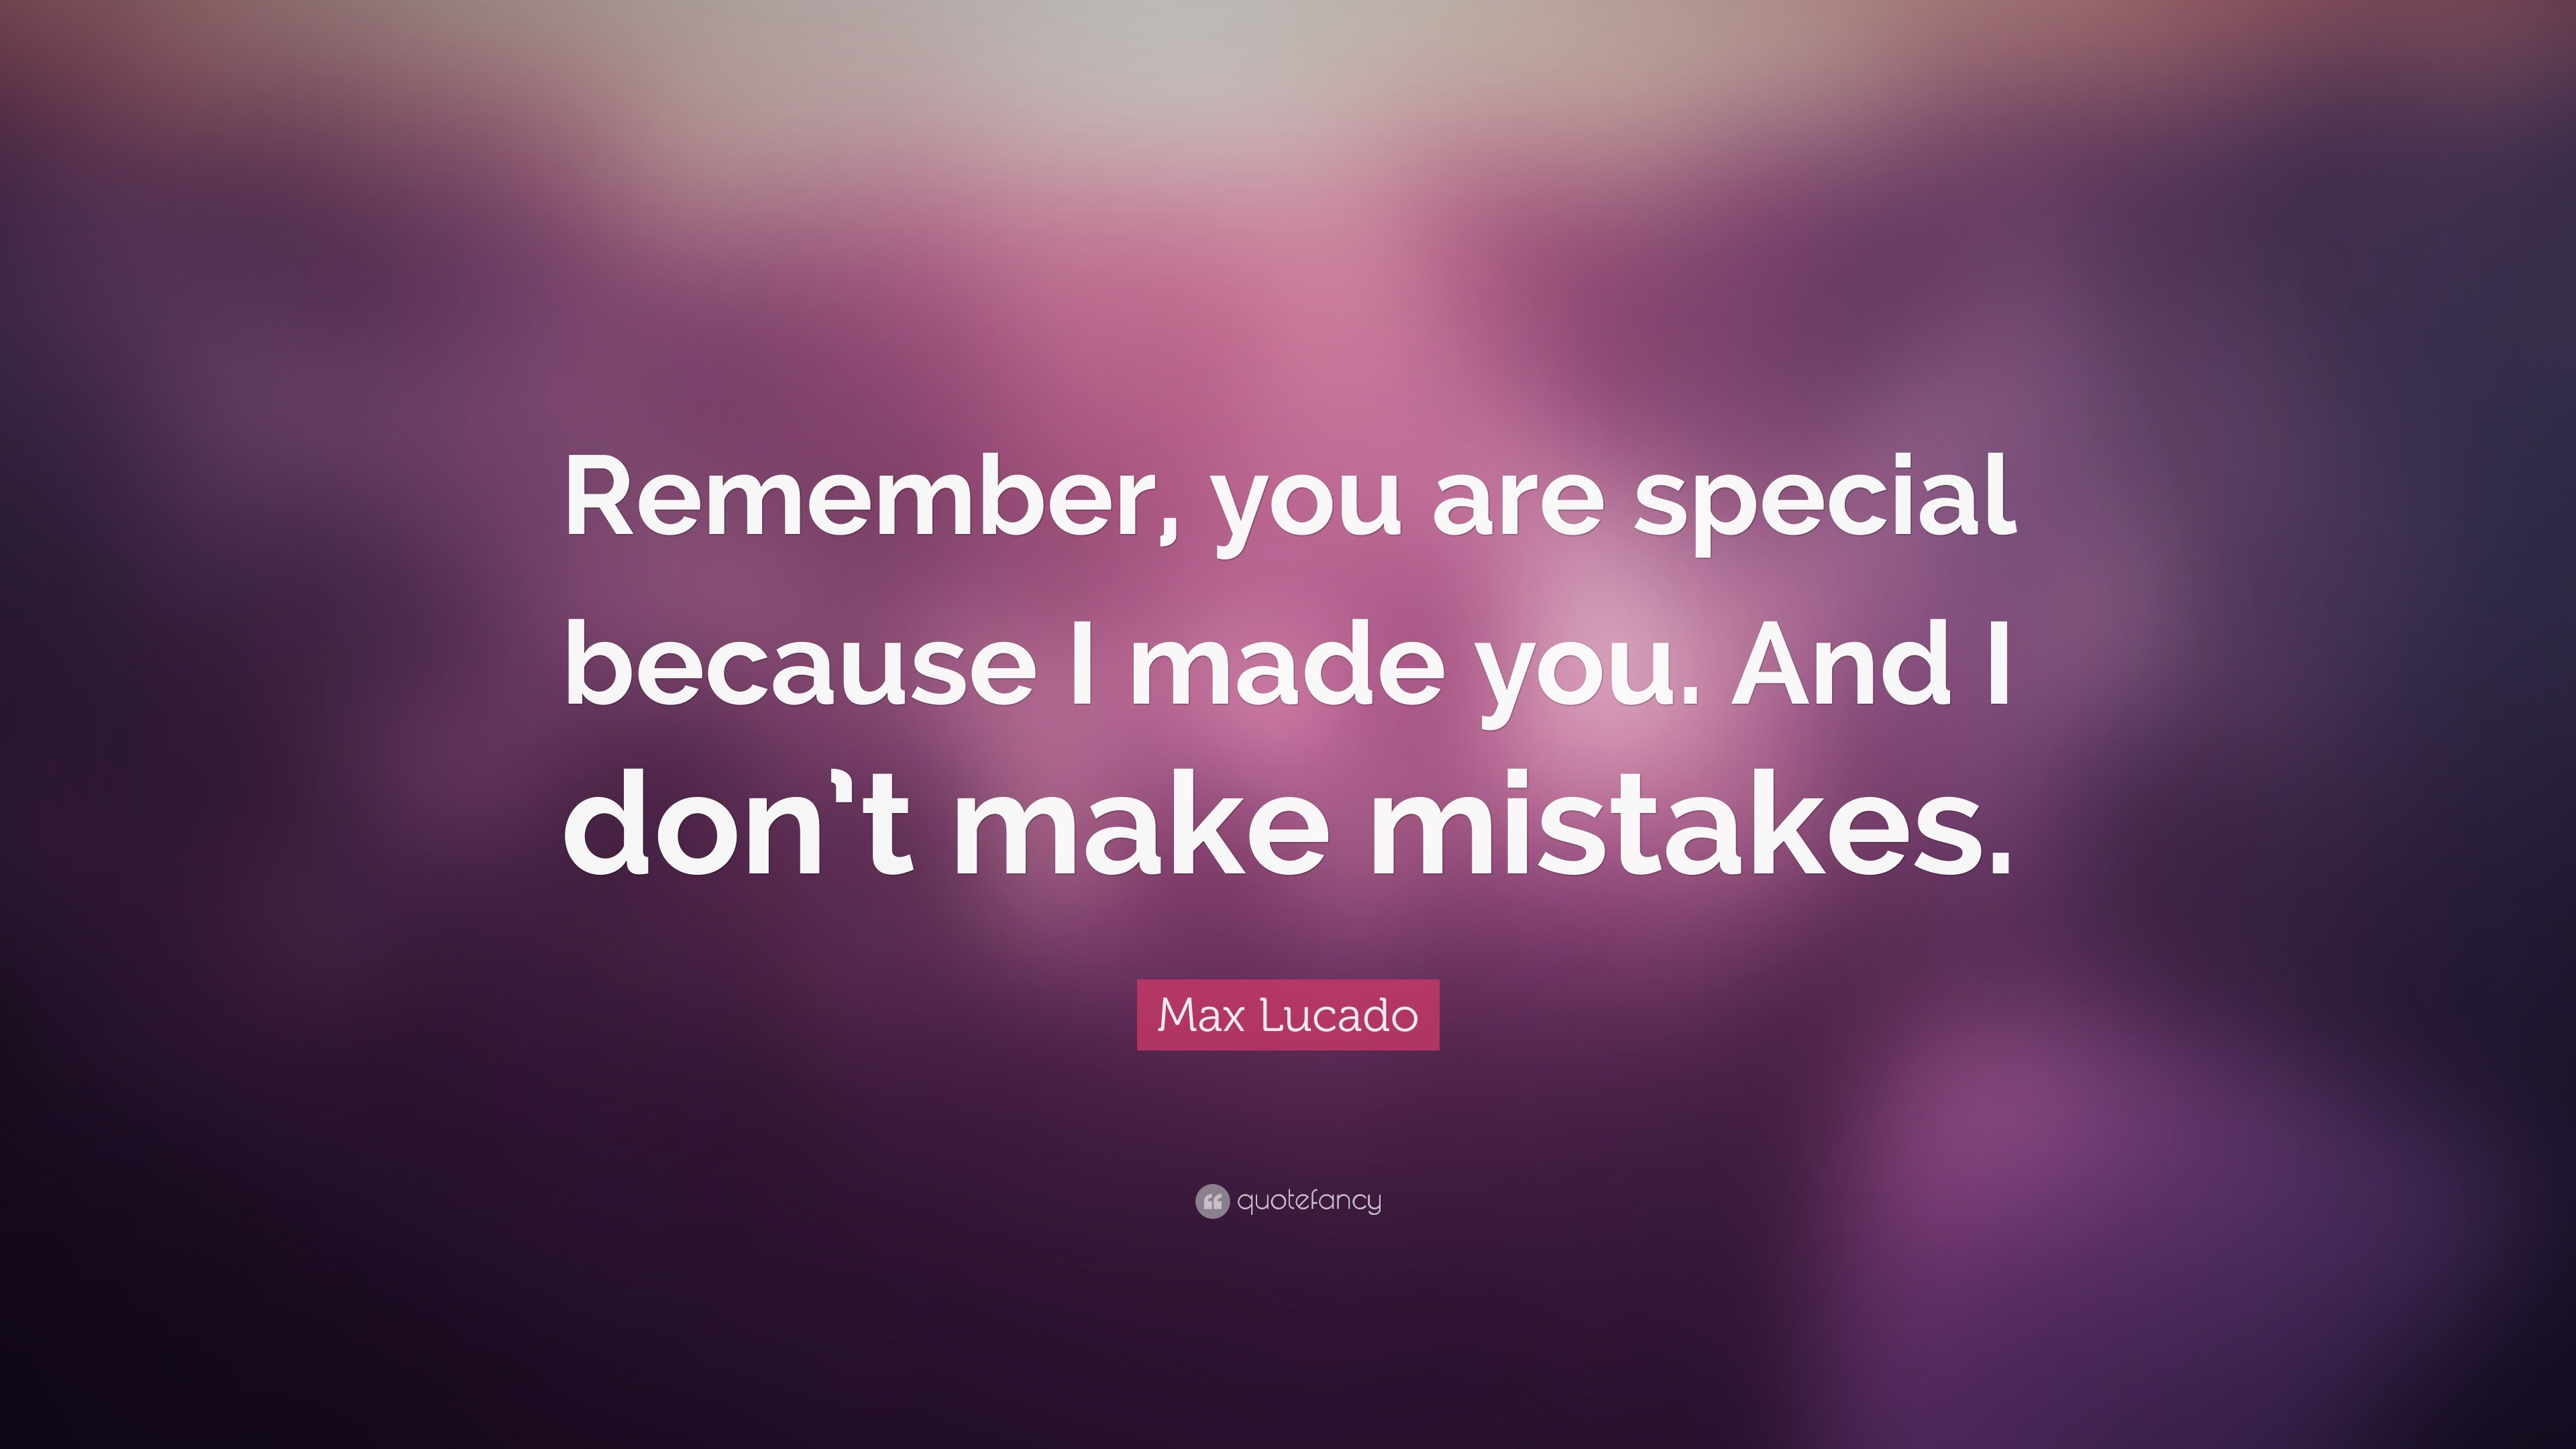 Max Lucado Quote: “Remember, you are special because I made you. And I